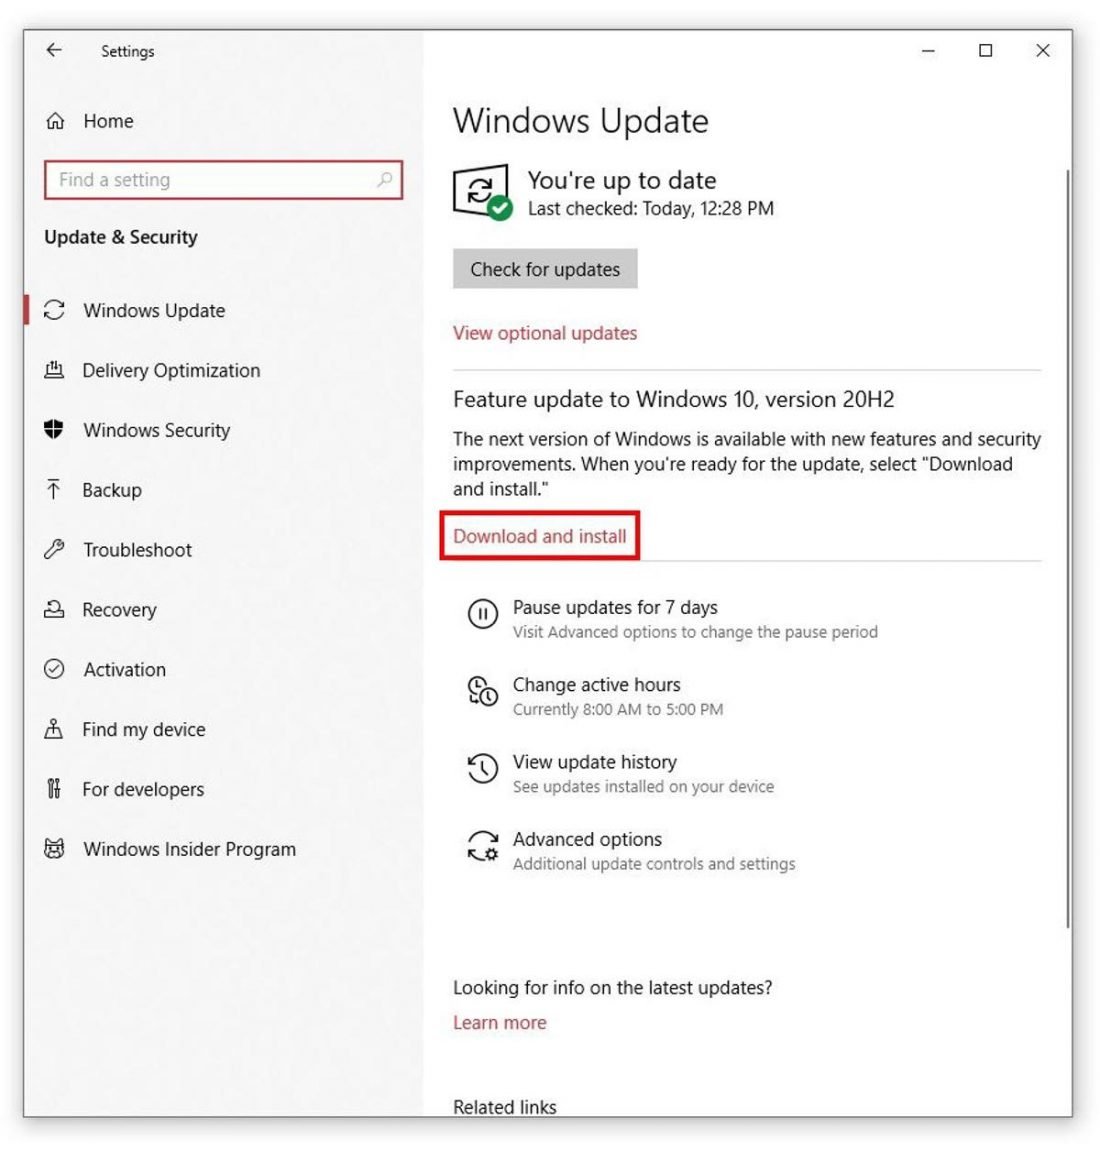 Update & Security window with Download and install highlighted.